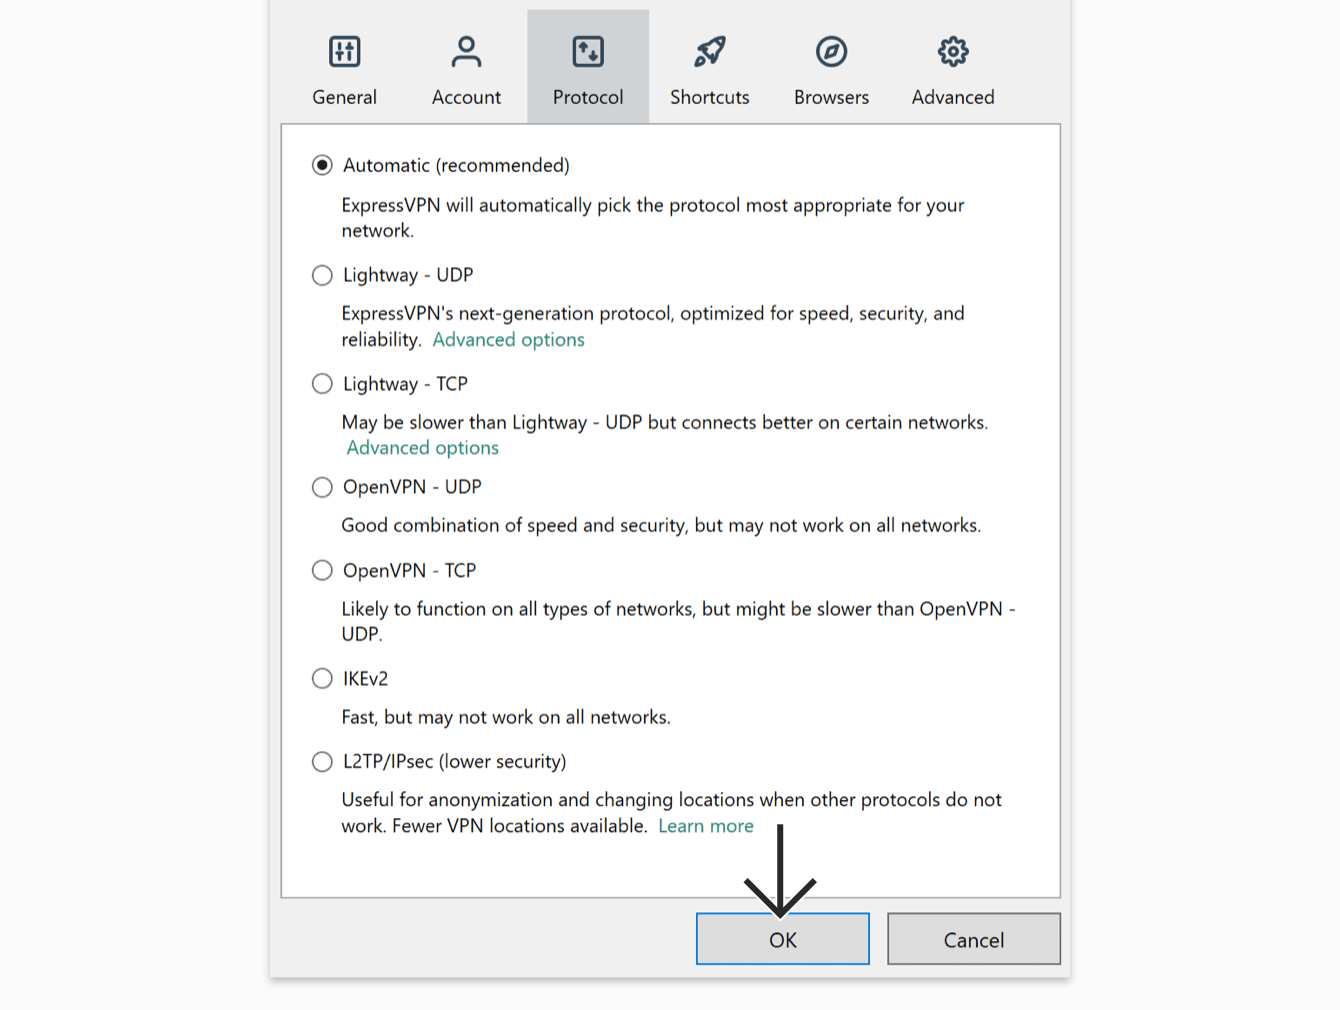 Select the protocol you want to use, then click "OK."